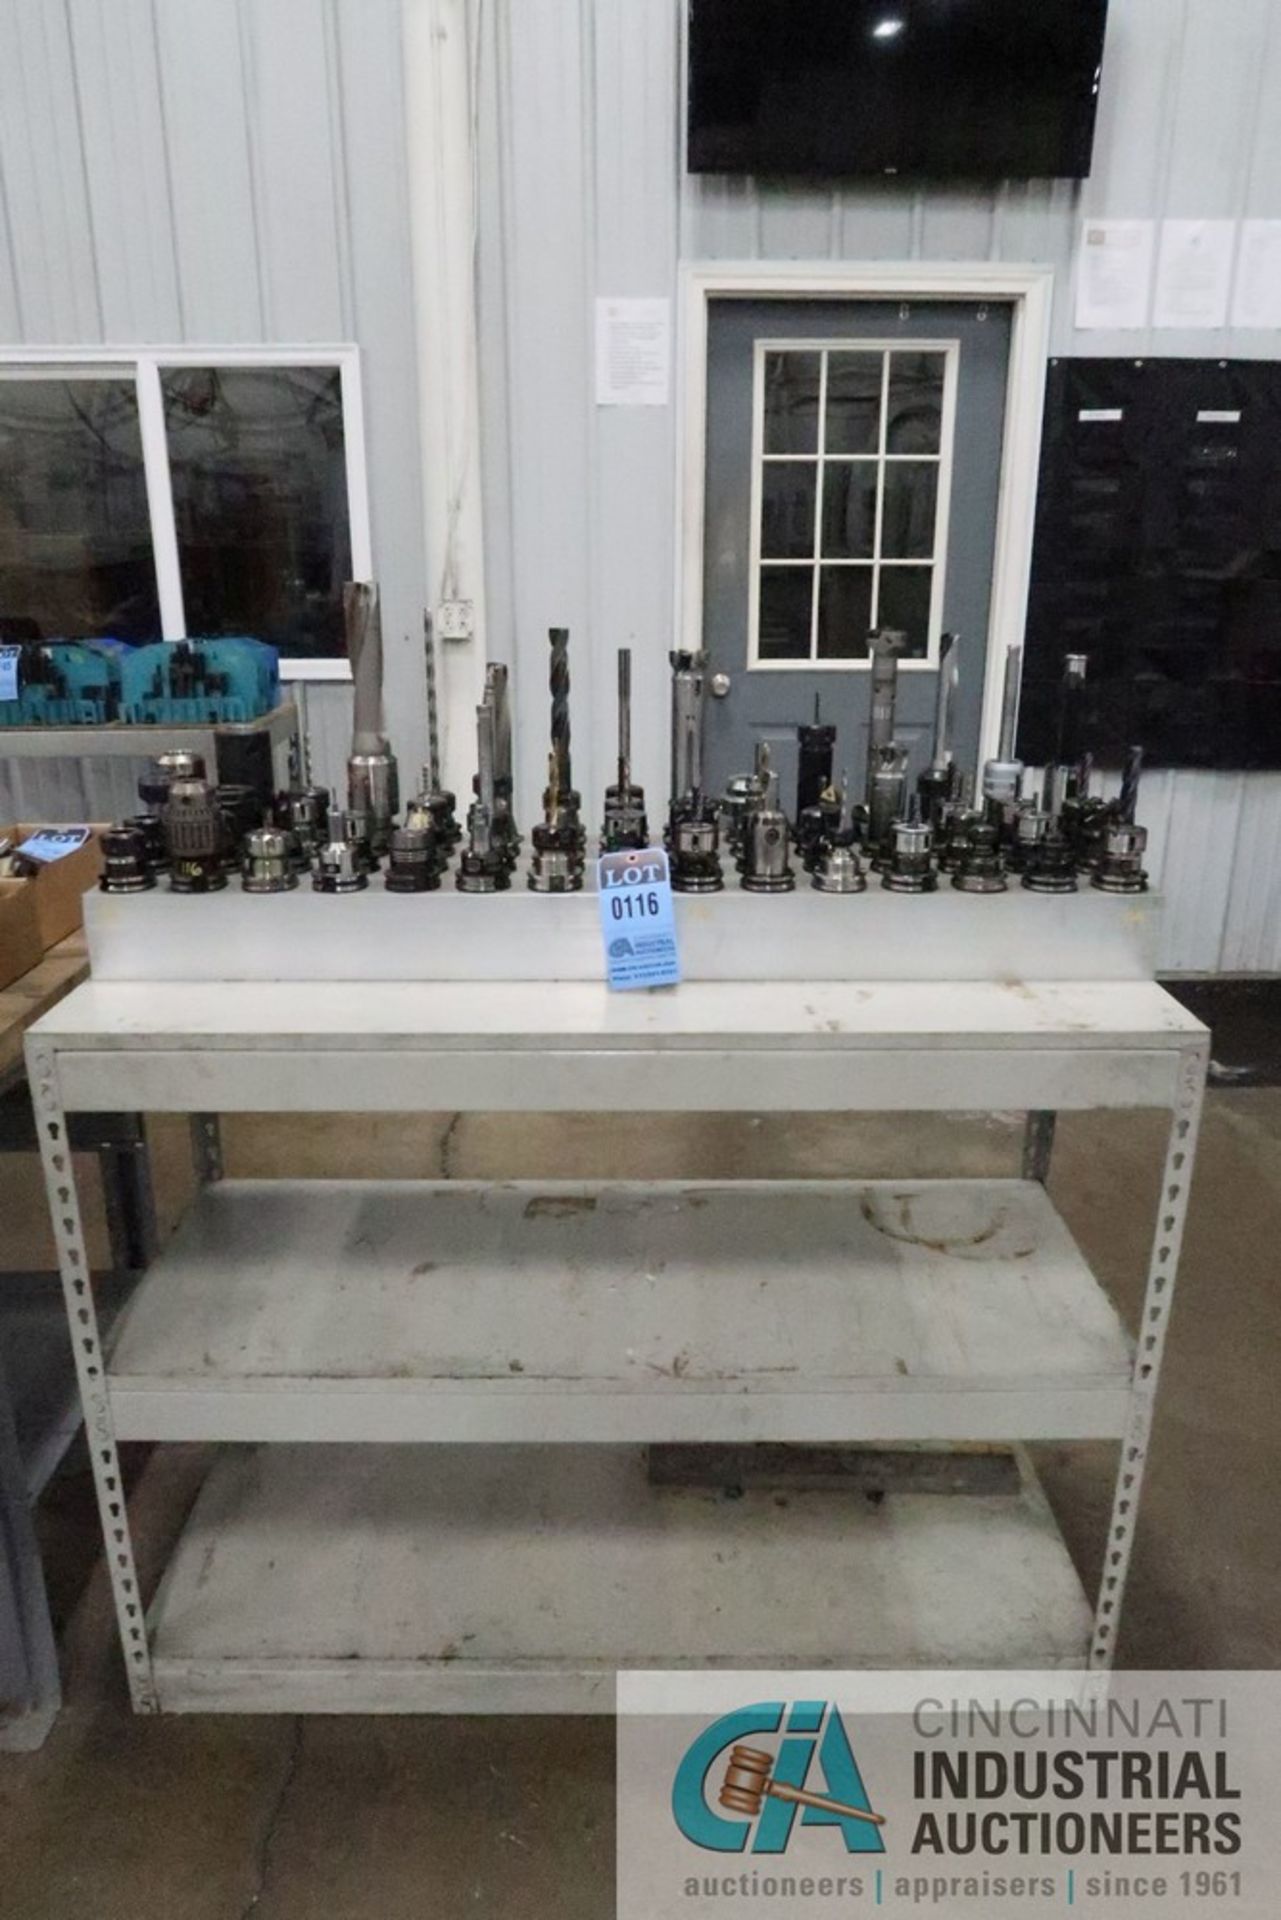 40 TAPER TOOL HOLDERS WITH STORAGE RACK AND SHELF UNIT